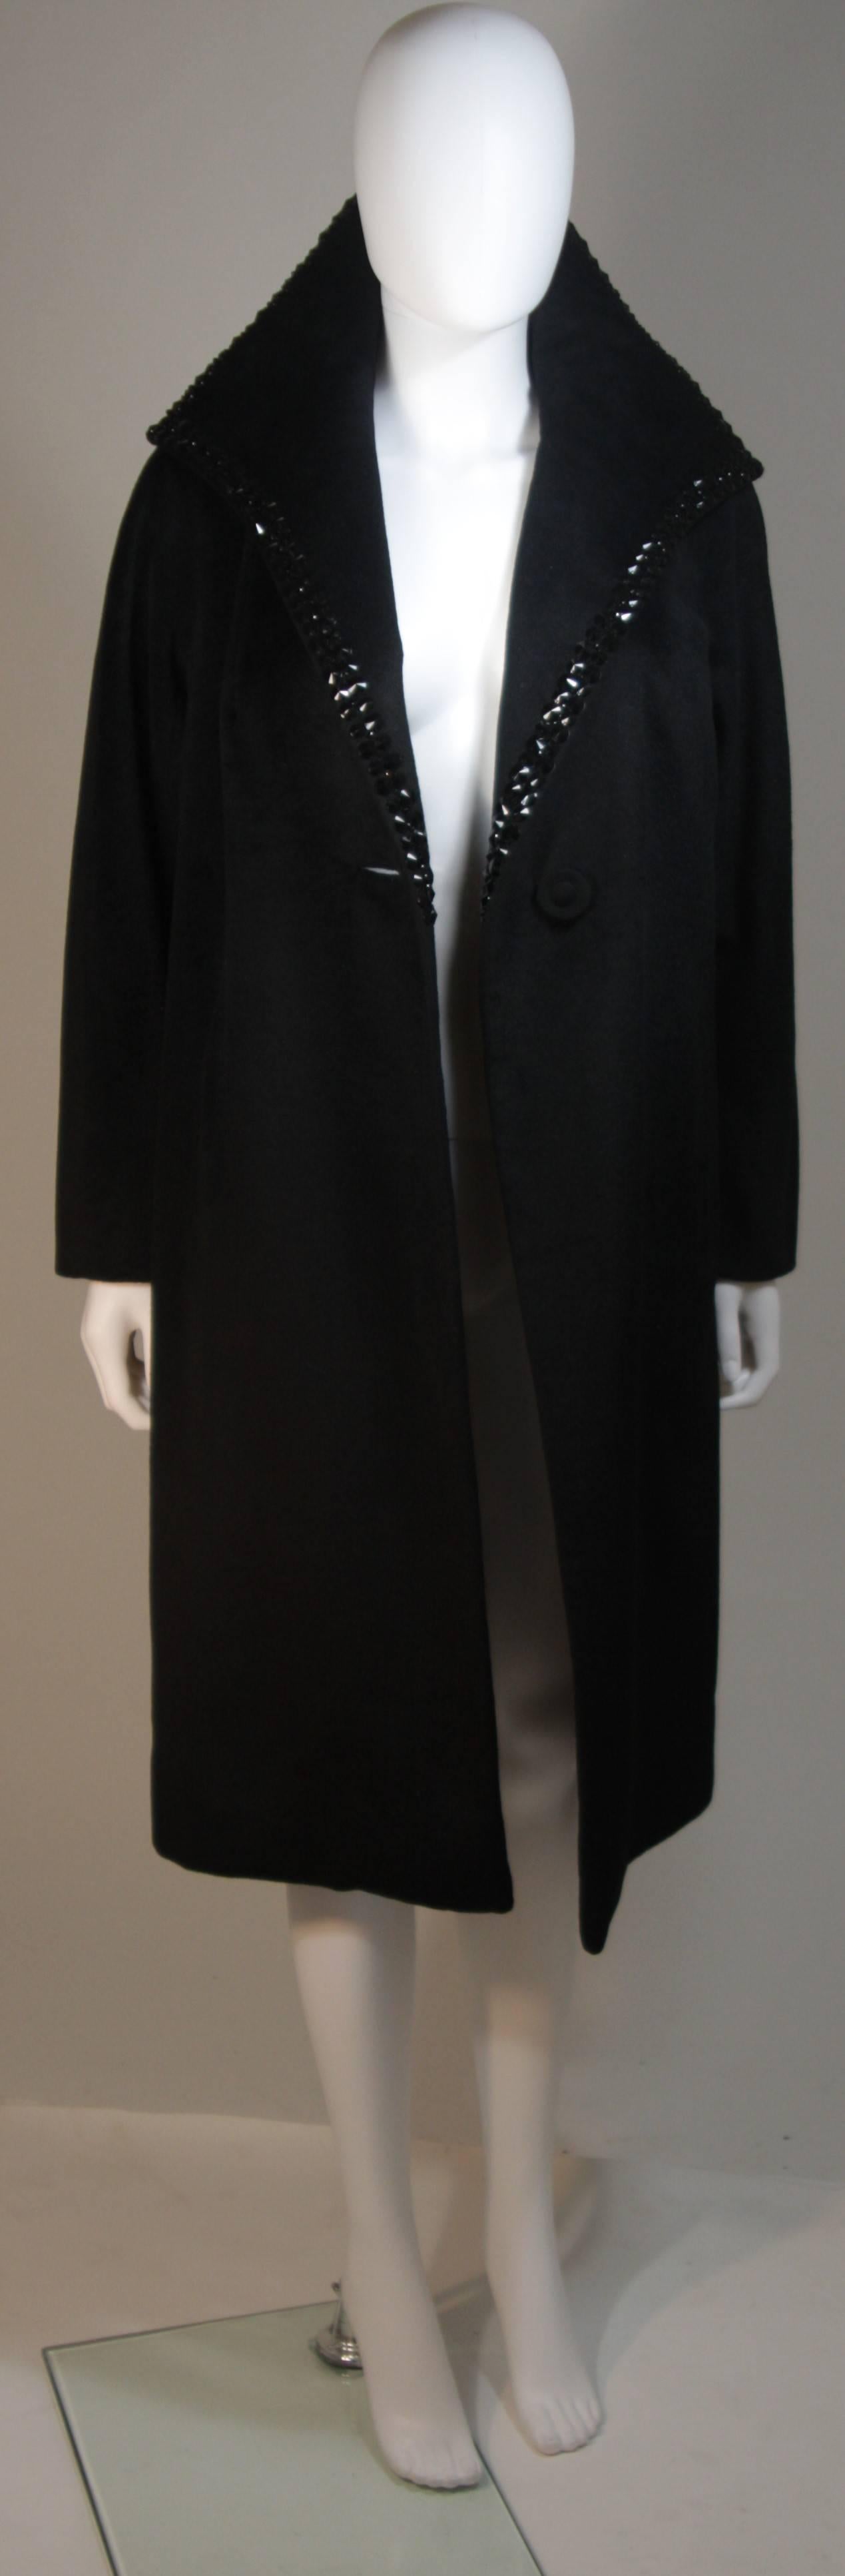 This McCalls Co.  coat is composed of a black wool and features a large collar. The collar has studded applique, applied by a contemporary designer. In excellent condition. Made in France.

  **Please cross-reference measurements for personal